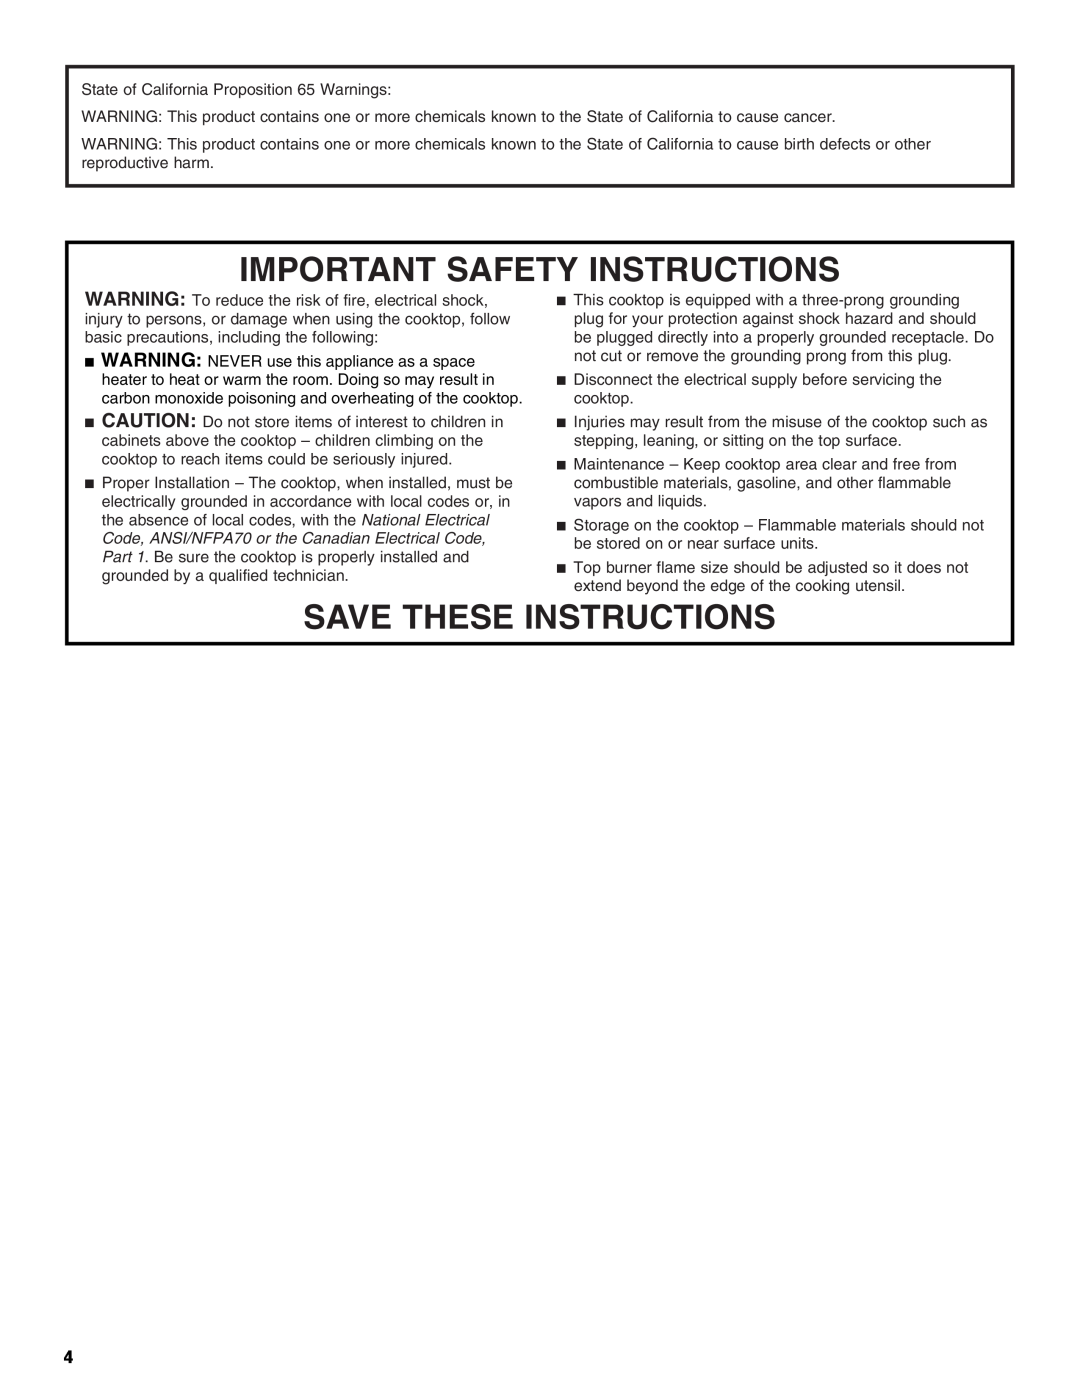 KitchenAid KGCV566 manual Important Safety Instructions, Save These Instructions 